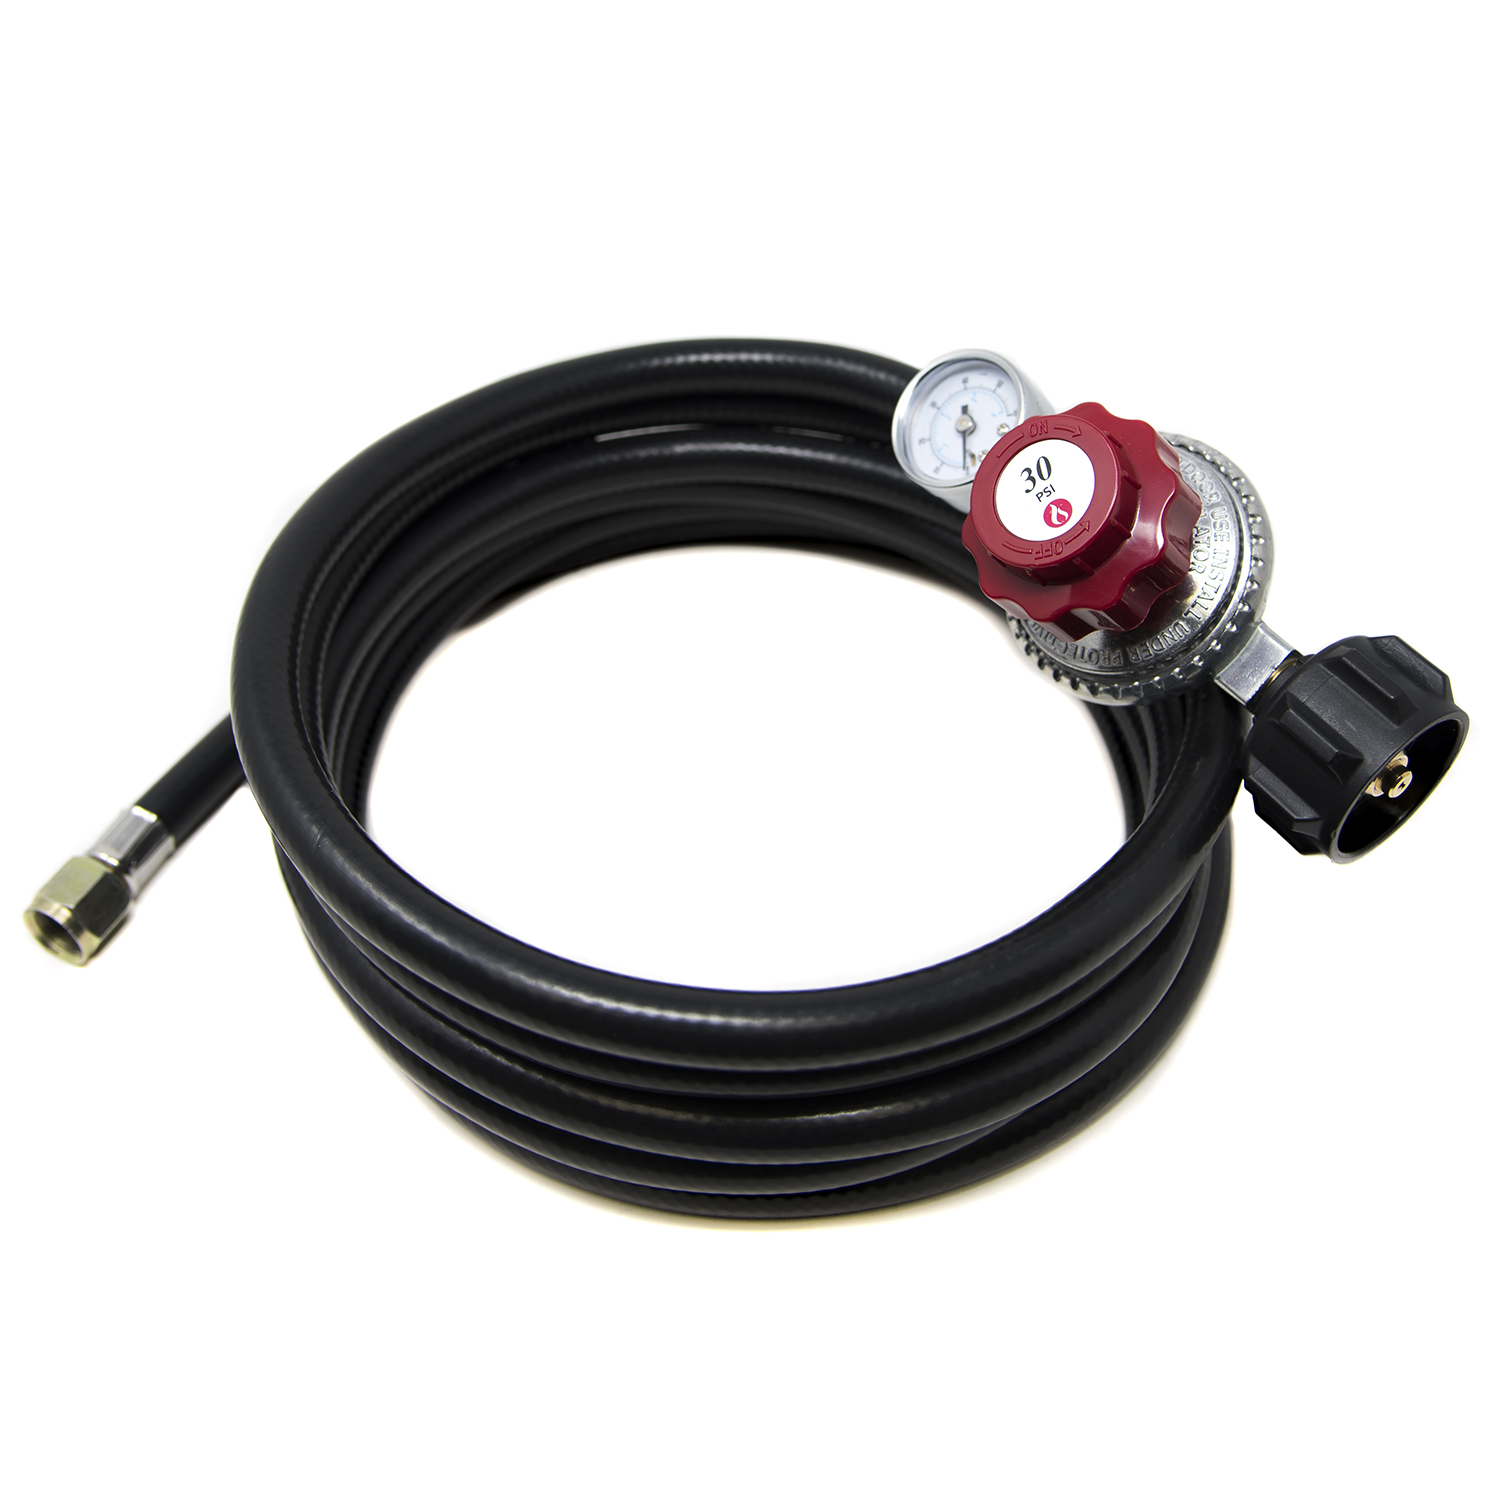 GasOne 12 ft Propane Hose and Regulator High Pressure 0-30PSI with PSI Gauge Propane Hose Universal QCC1 for Propane Gas Grill, Propane Heater and Propane Fire Pit, 3/8" Female Flare Nut - image 1 of 3